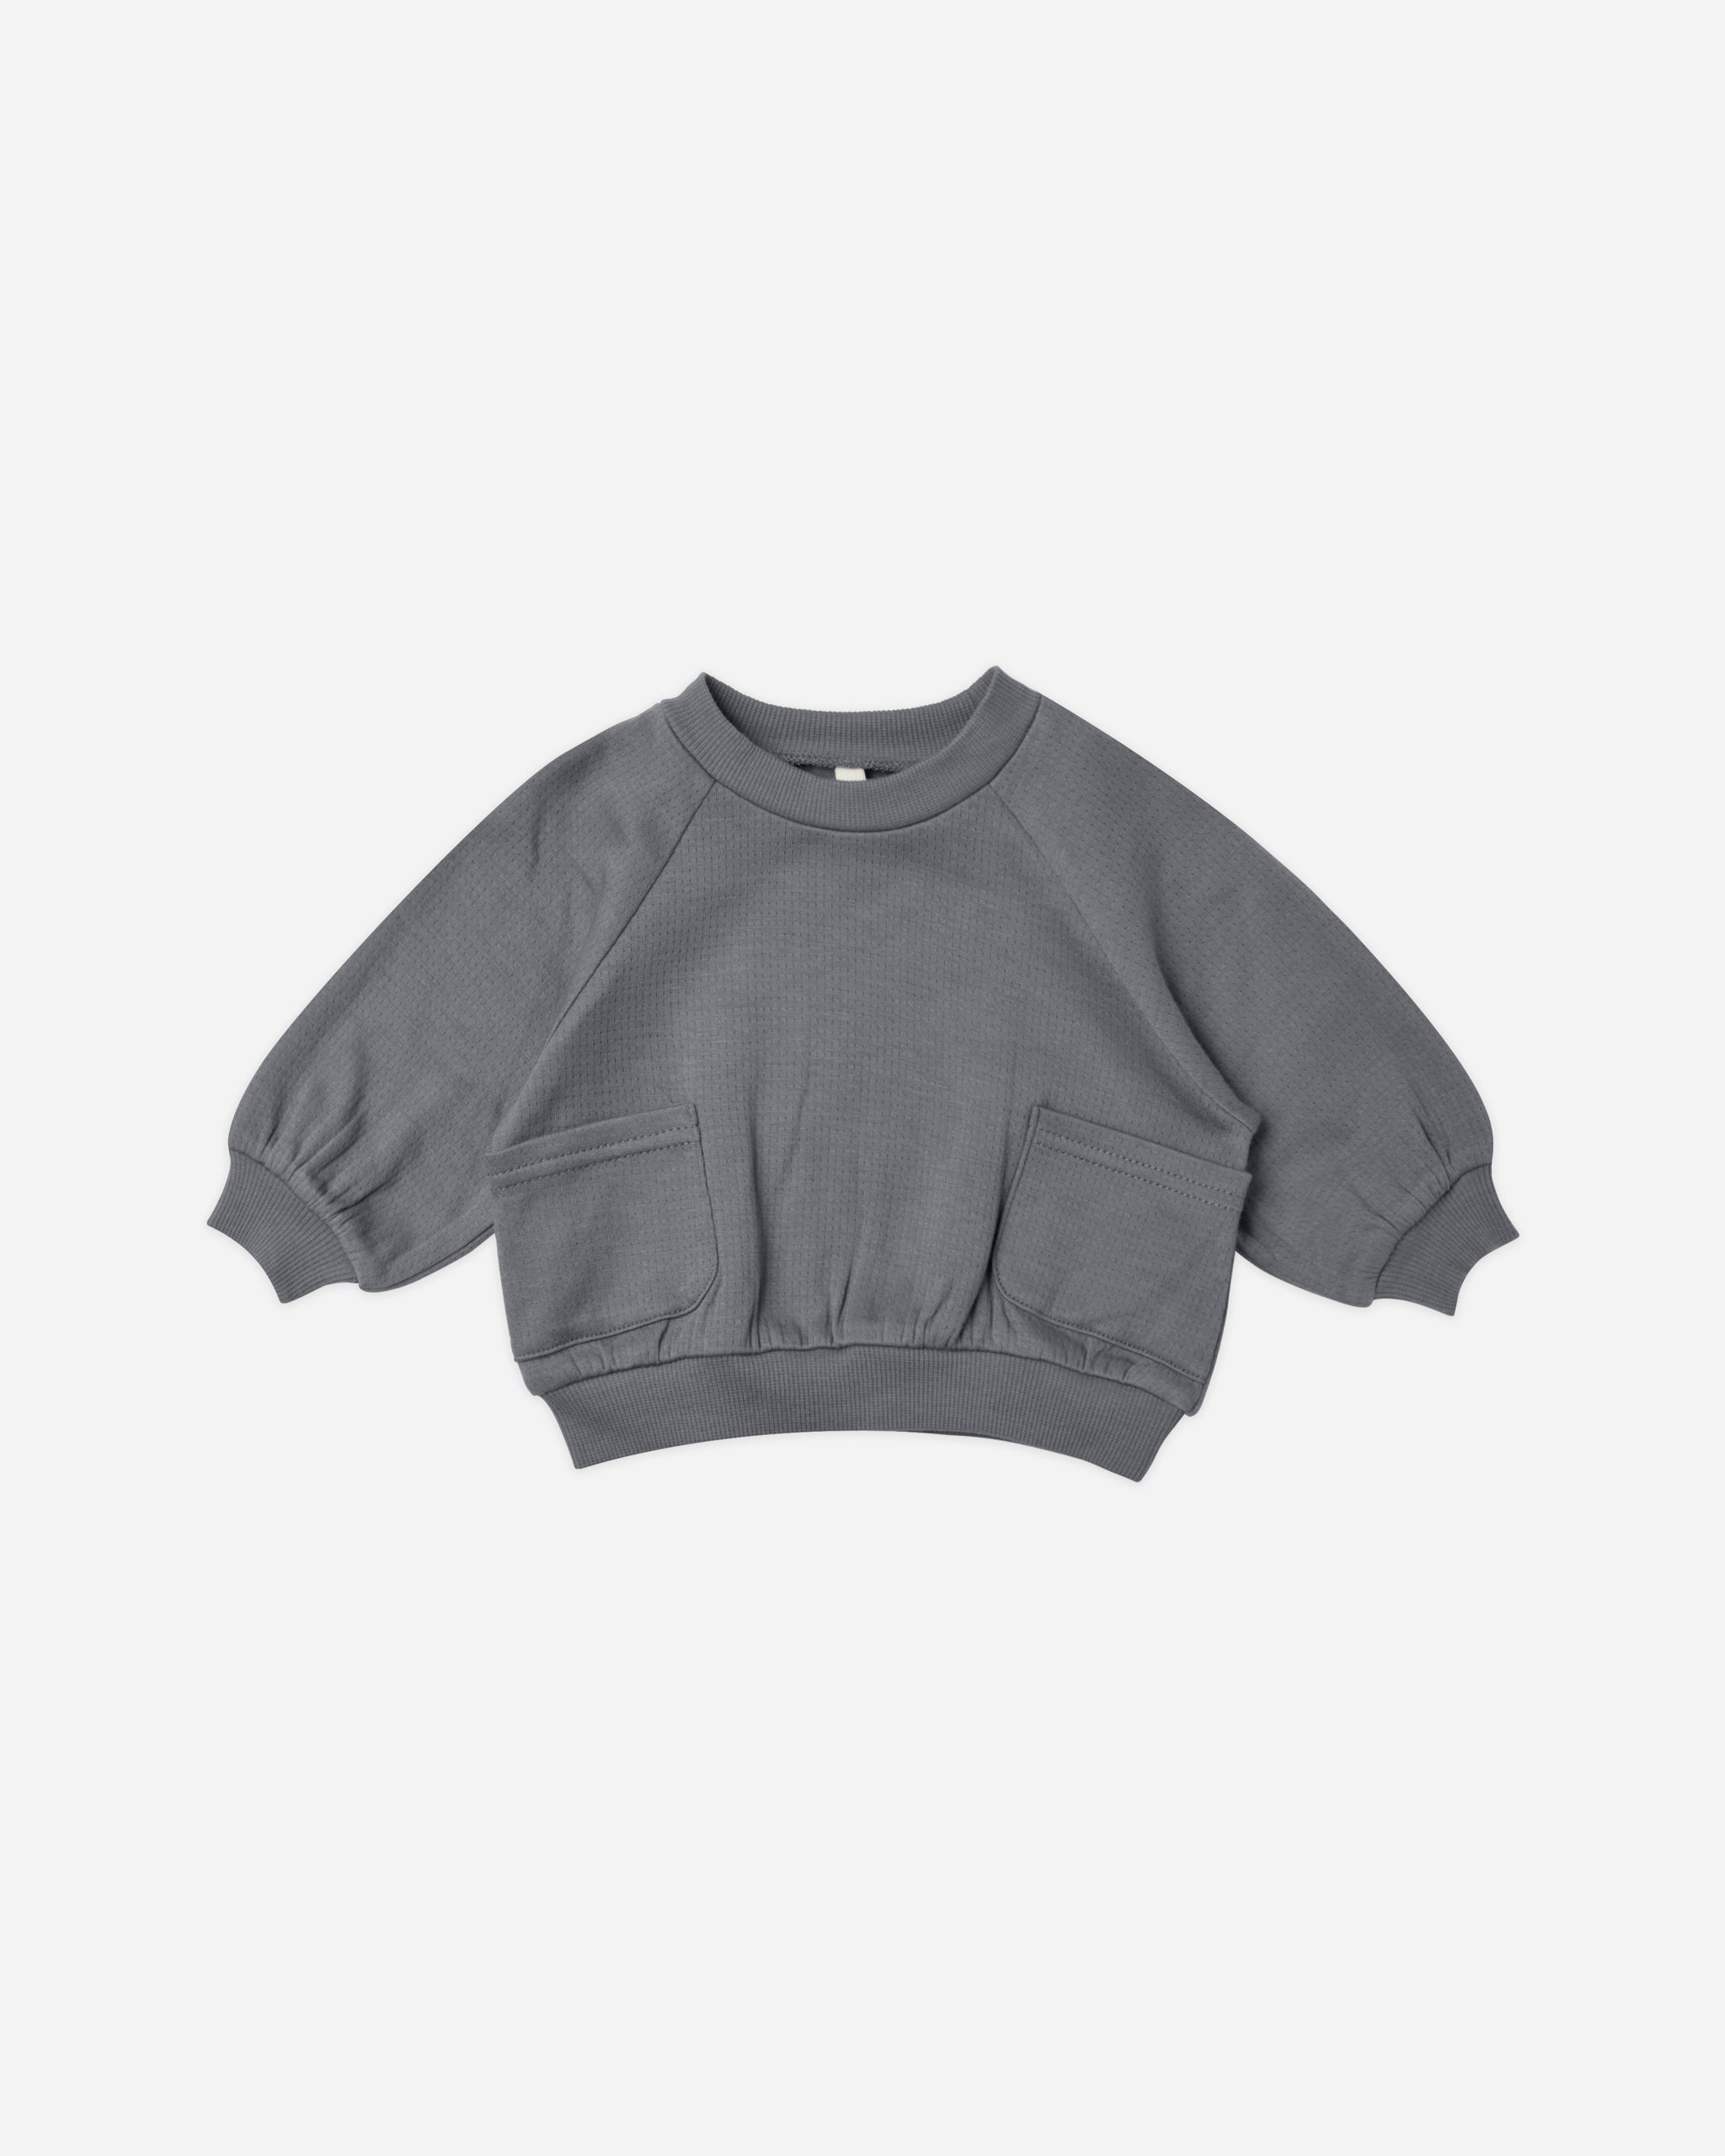 Pocket Sweatshirt || Navy - Rylee + Cru | Kids Clothes | Trendy Baby Clothes | Modern Infant Outfits |